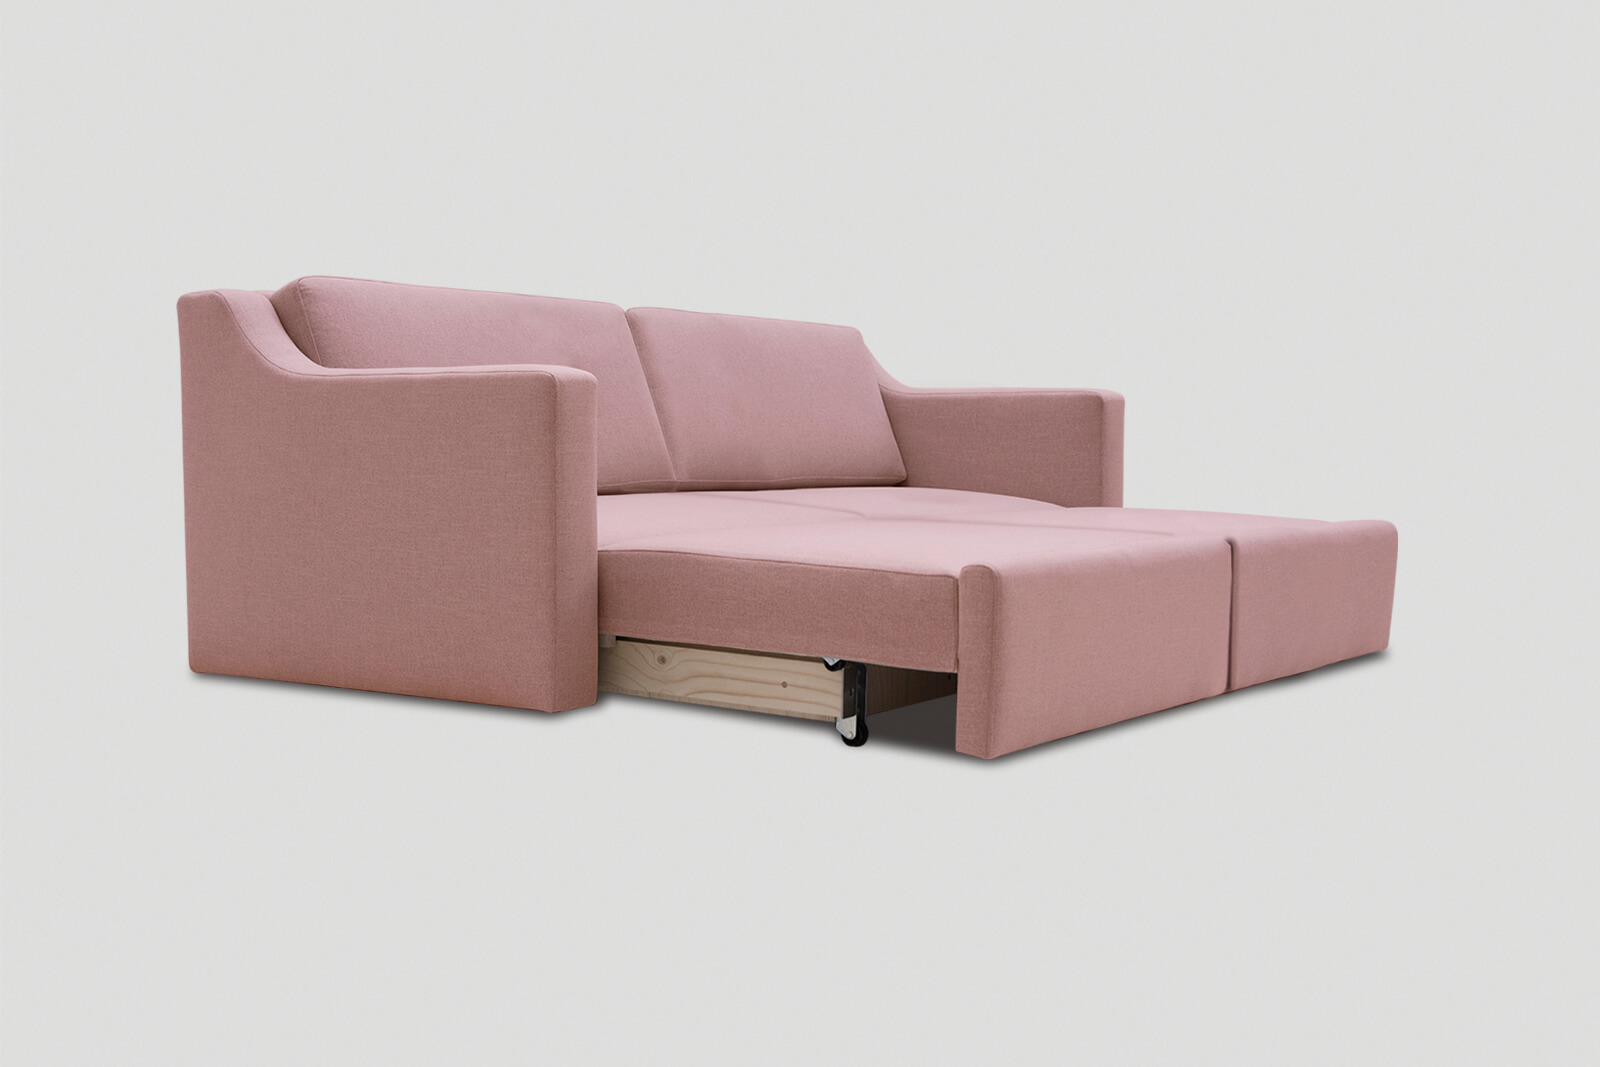 HBSB02-kingsize-sofa-bed-rosewater-3q-daybed